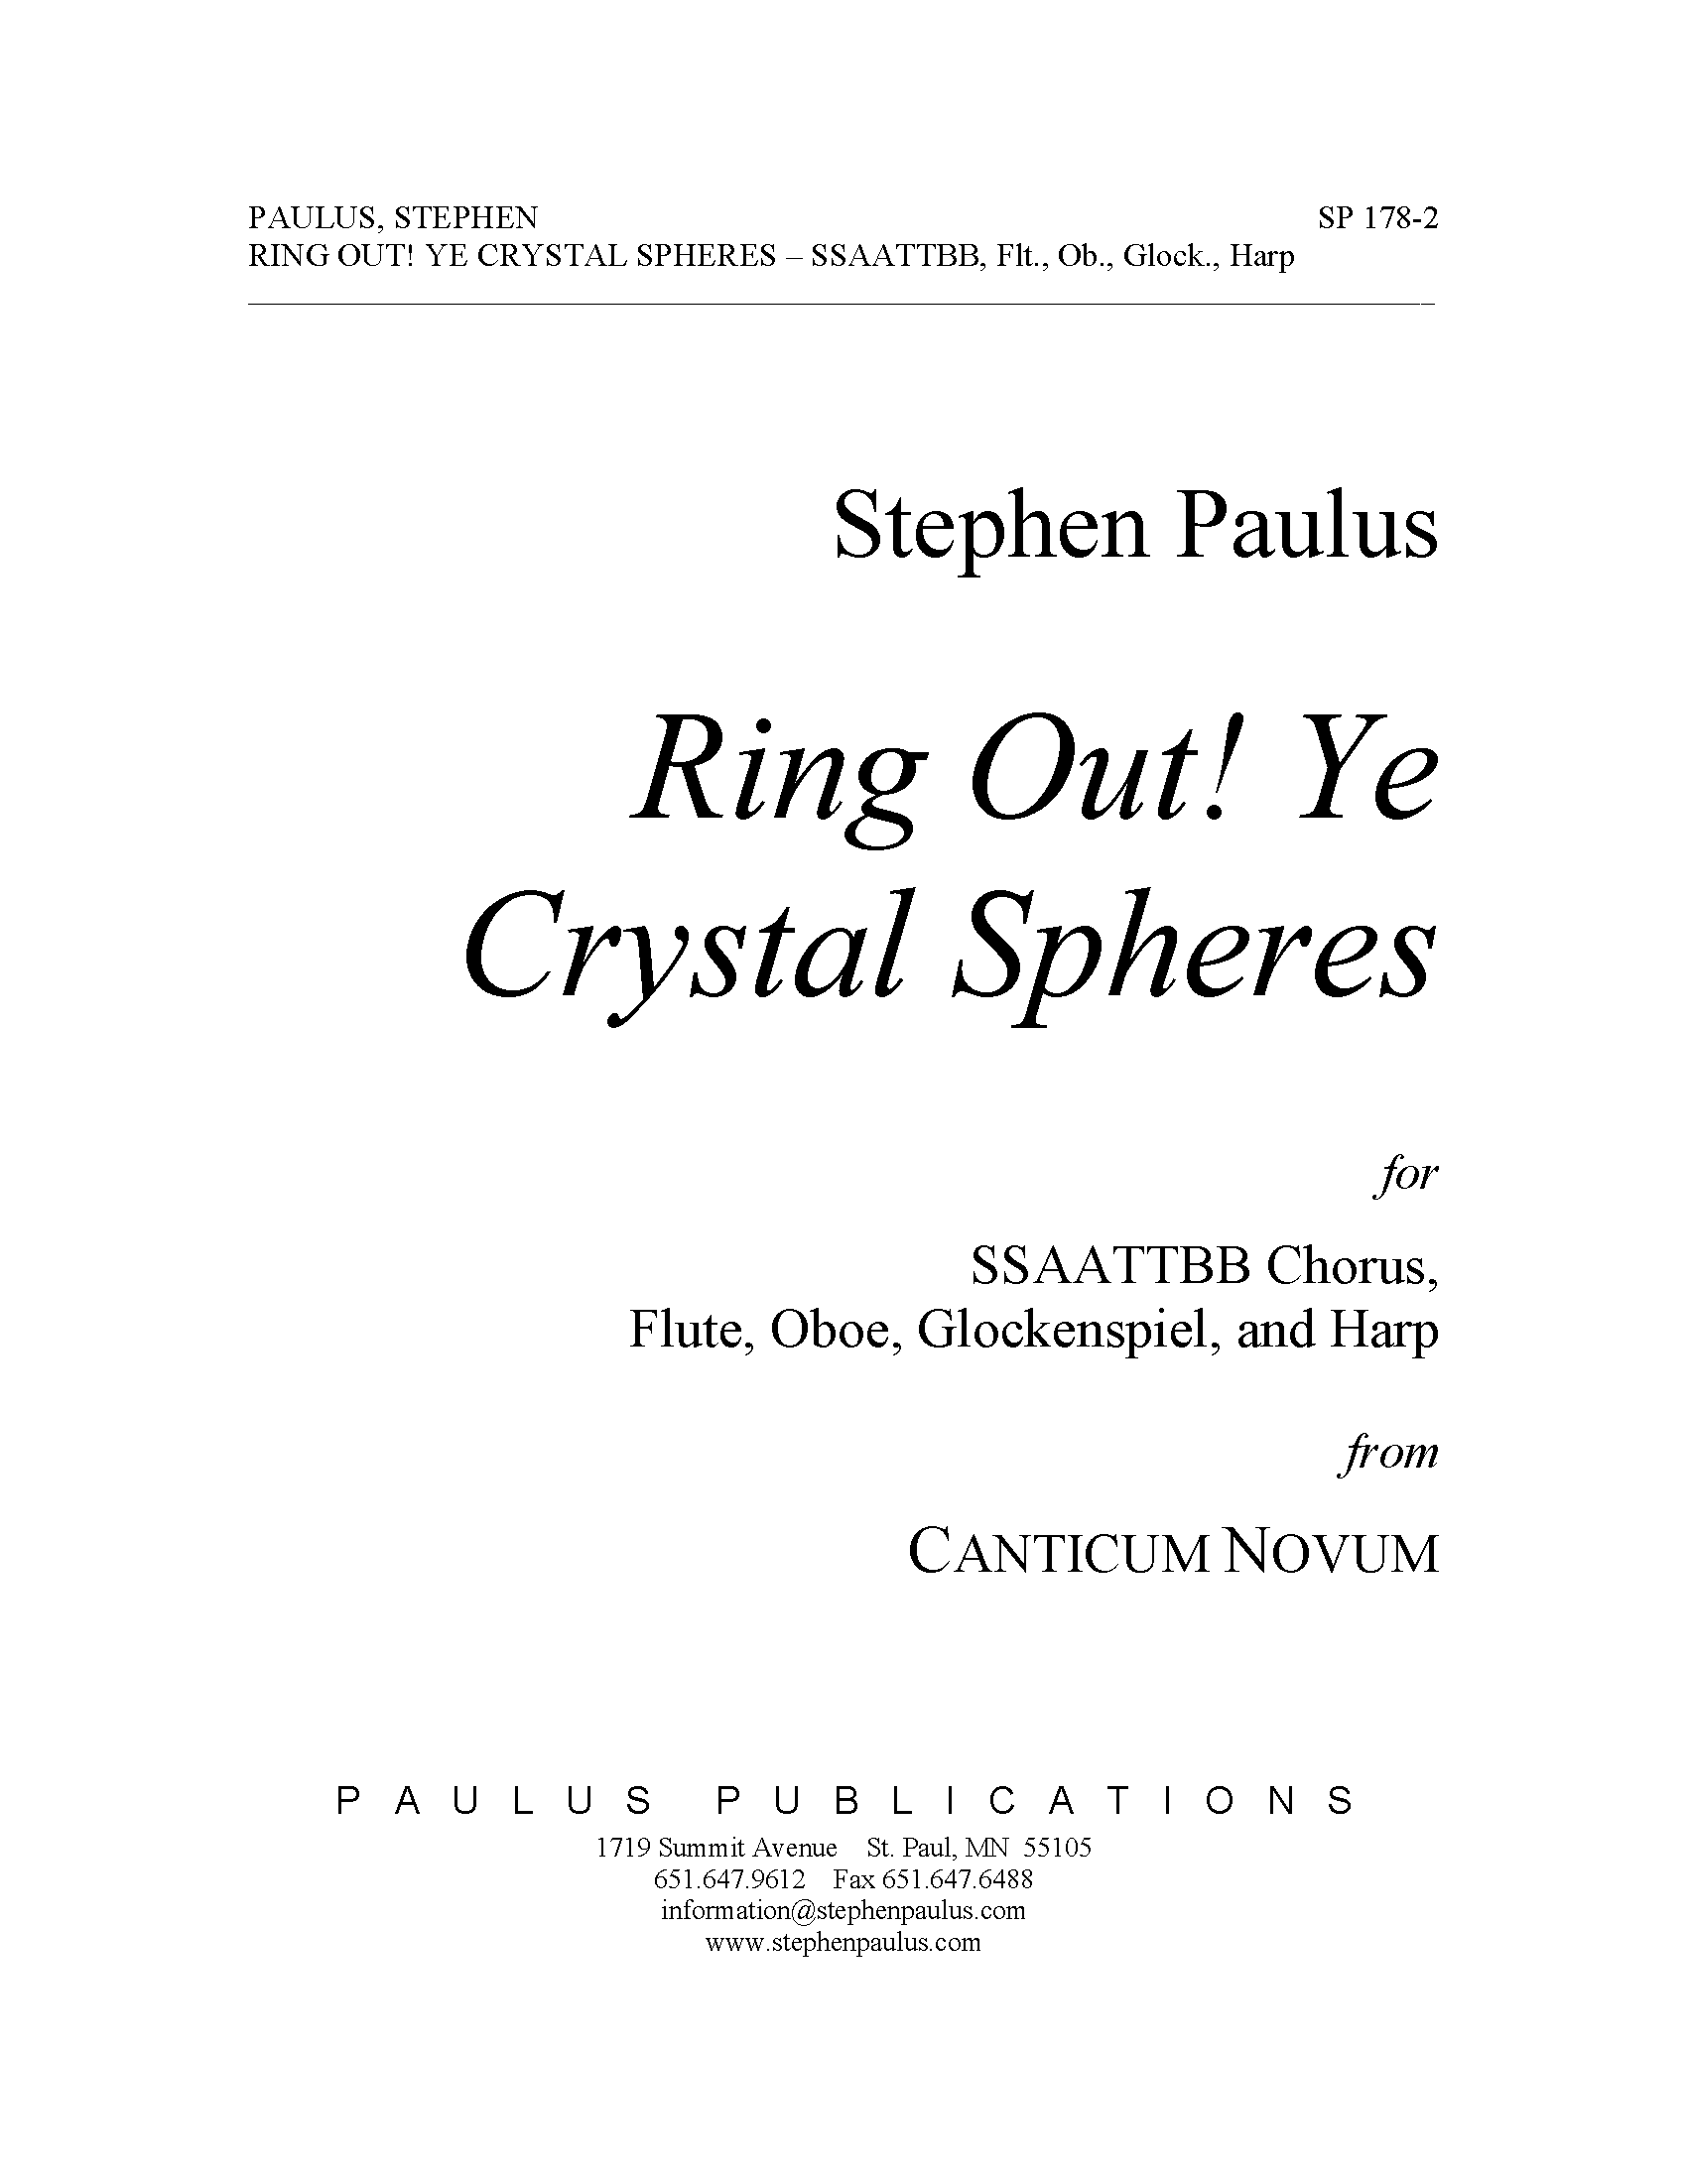 Ring Out! Ye Crystal Spheres (from Canticum Novum) for SSAATTBB Chorus, Flute, Oboe, Glockenspiel & Harp - Click Image to Close